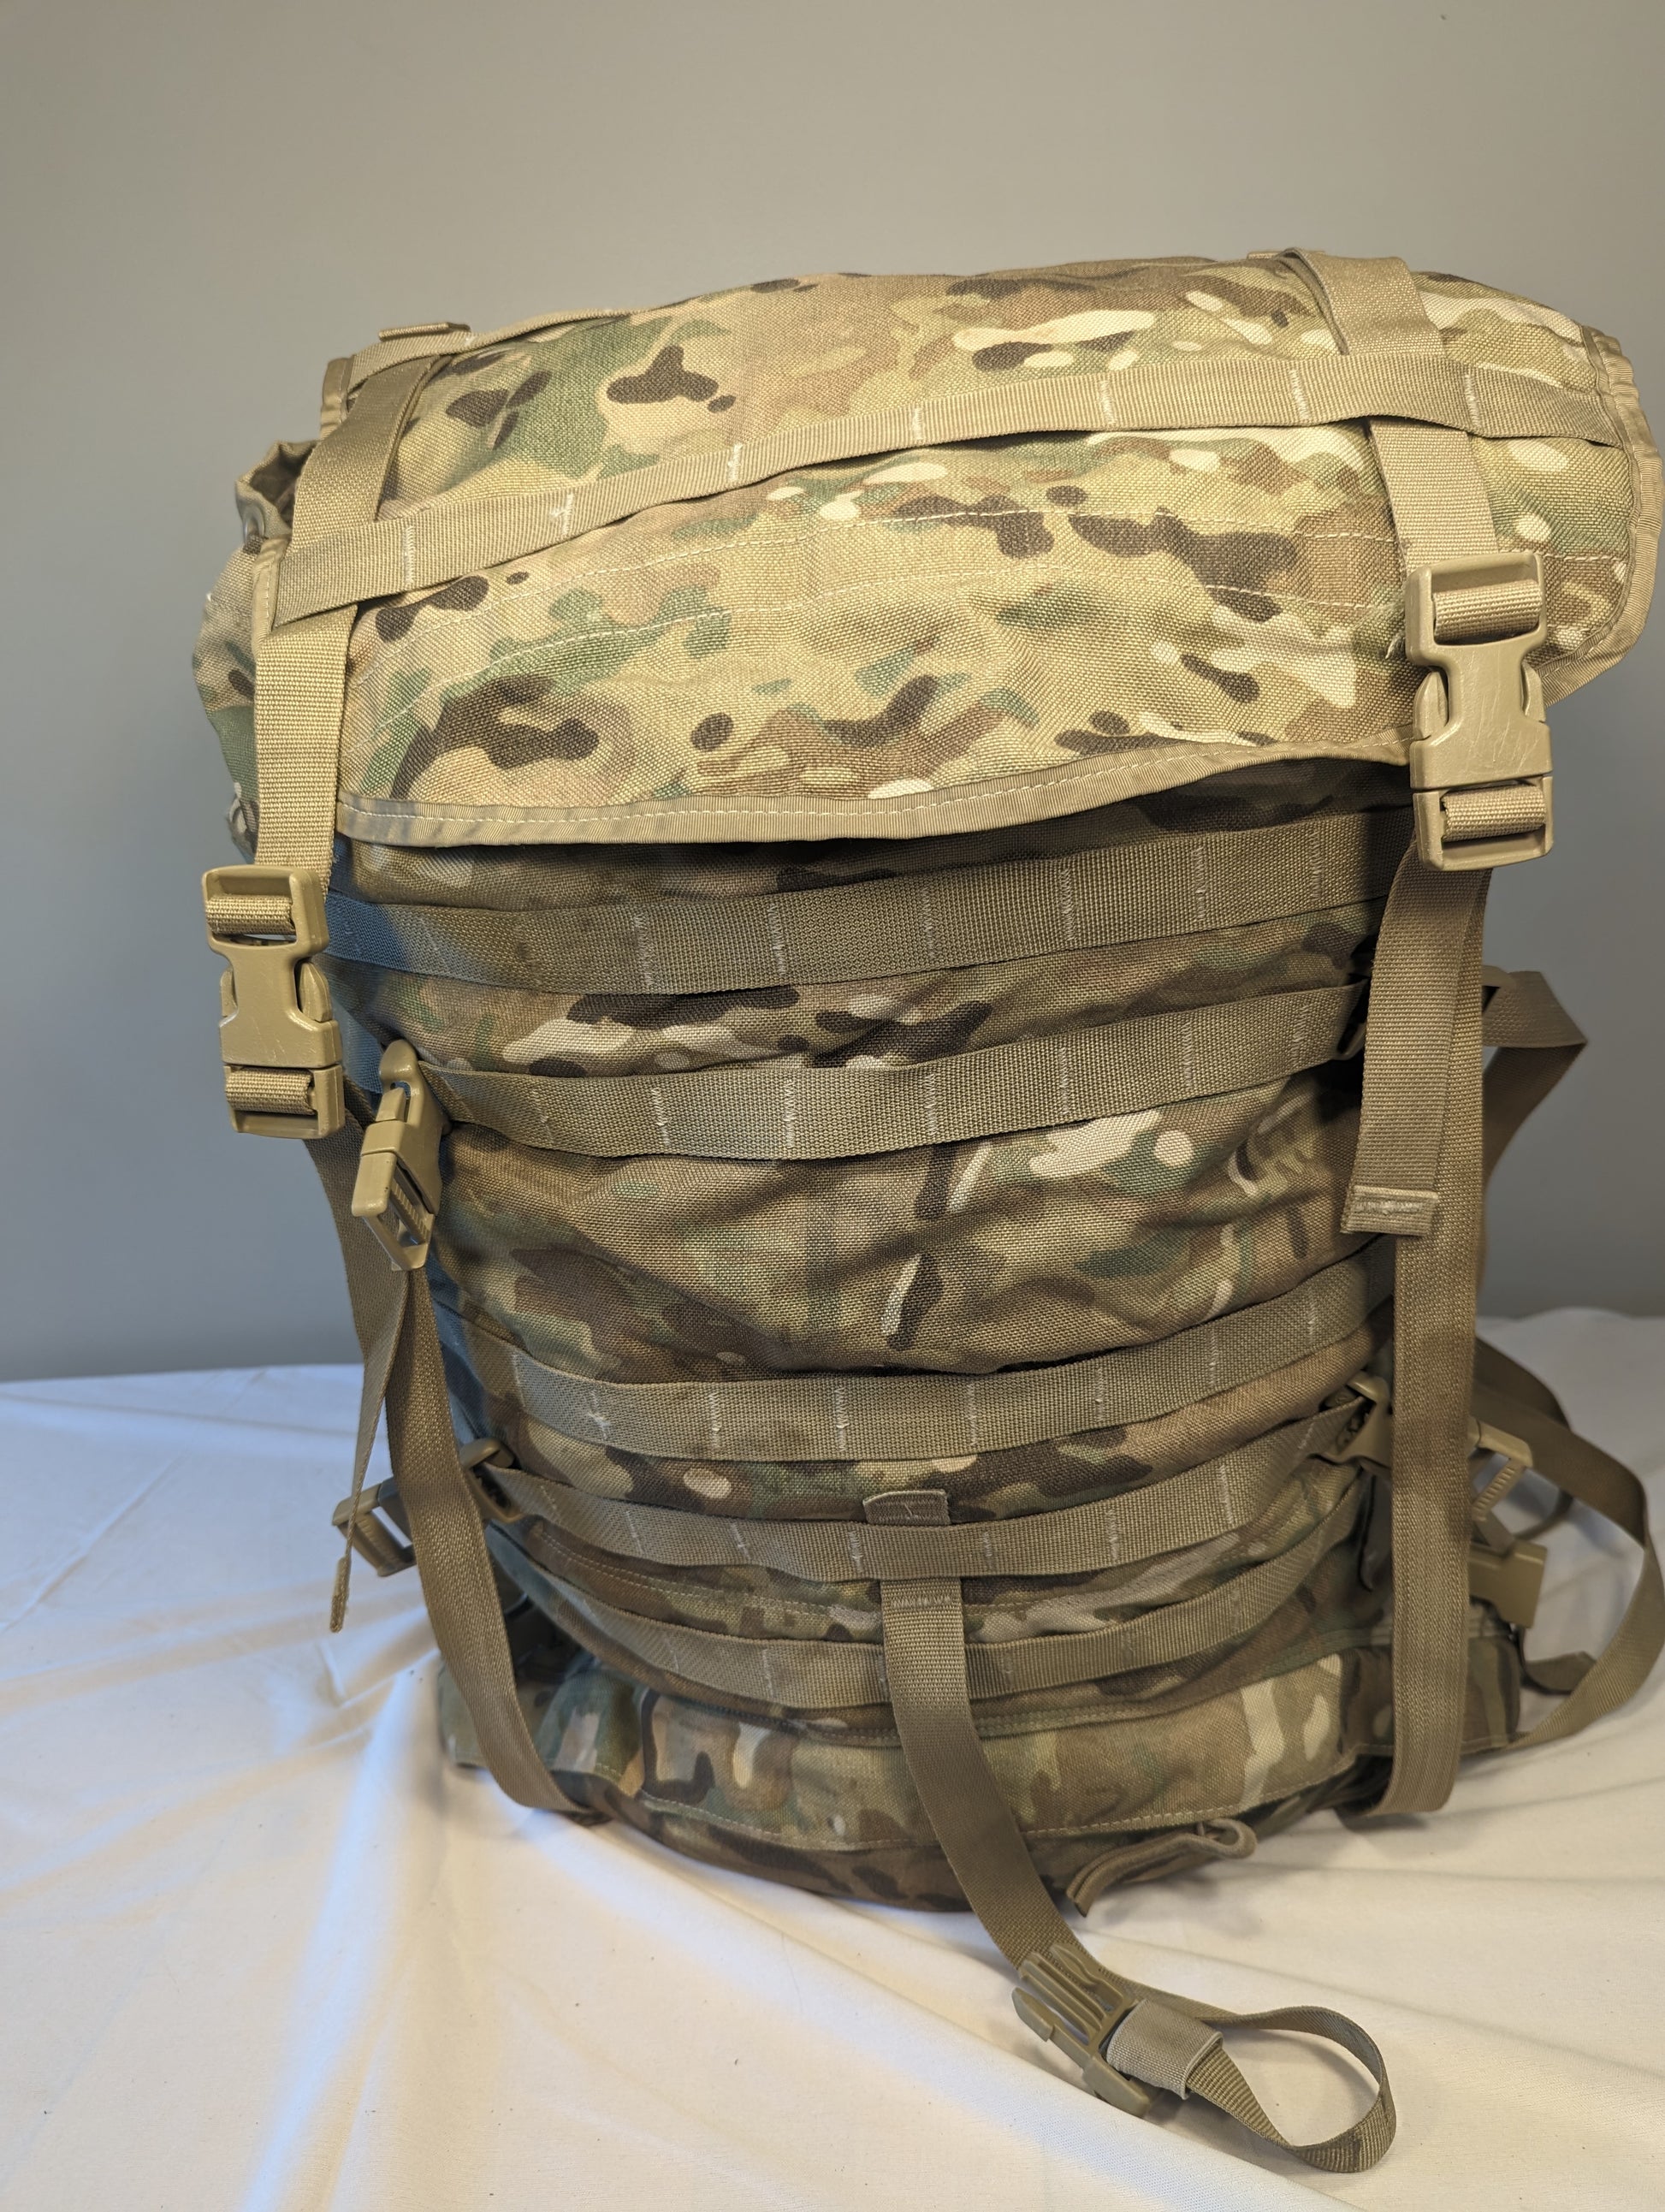 2 - Eagle Ind MULTICAM LARGE FIELD RUCK Supply – RUCKSACK MOLLE PACK Onl OCP City Forest II